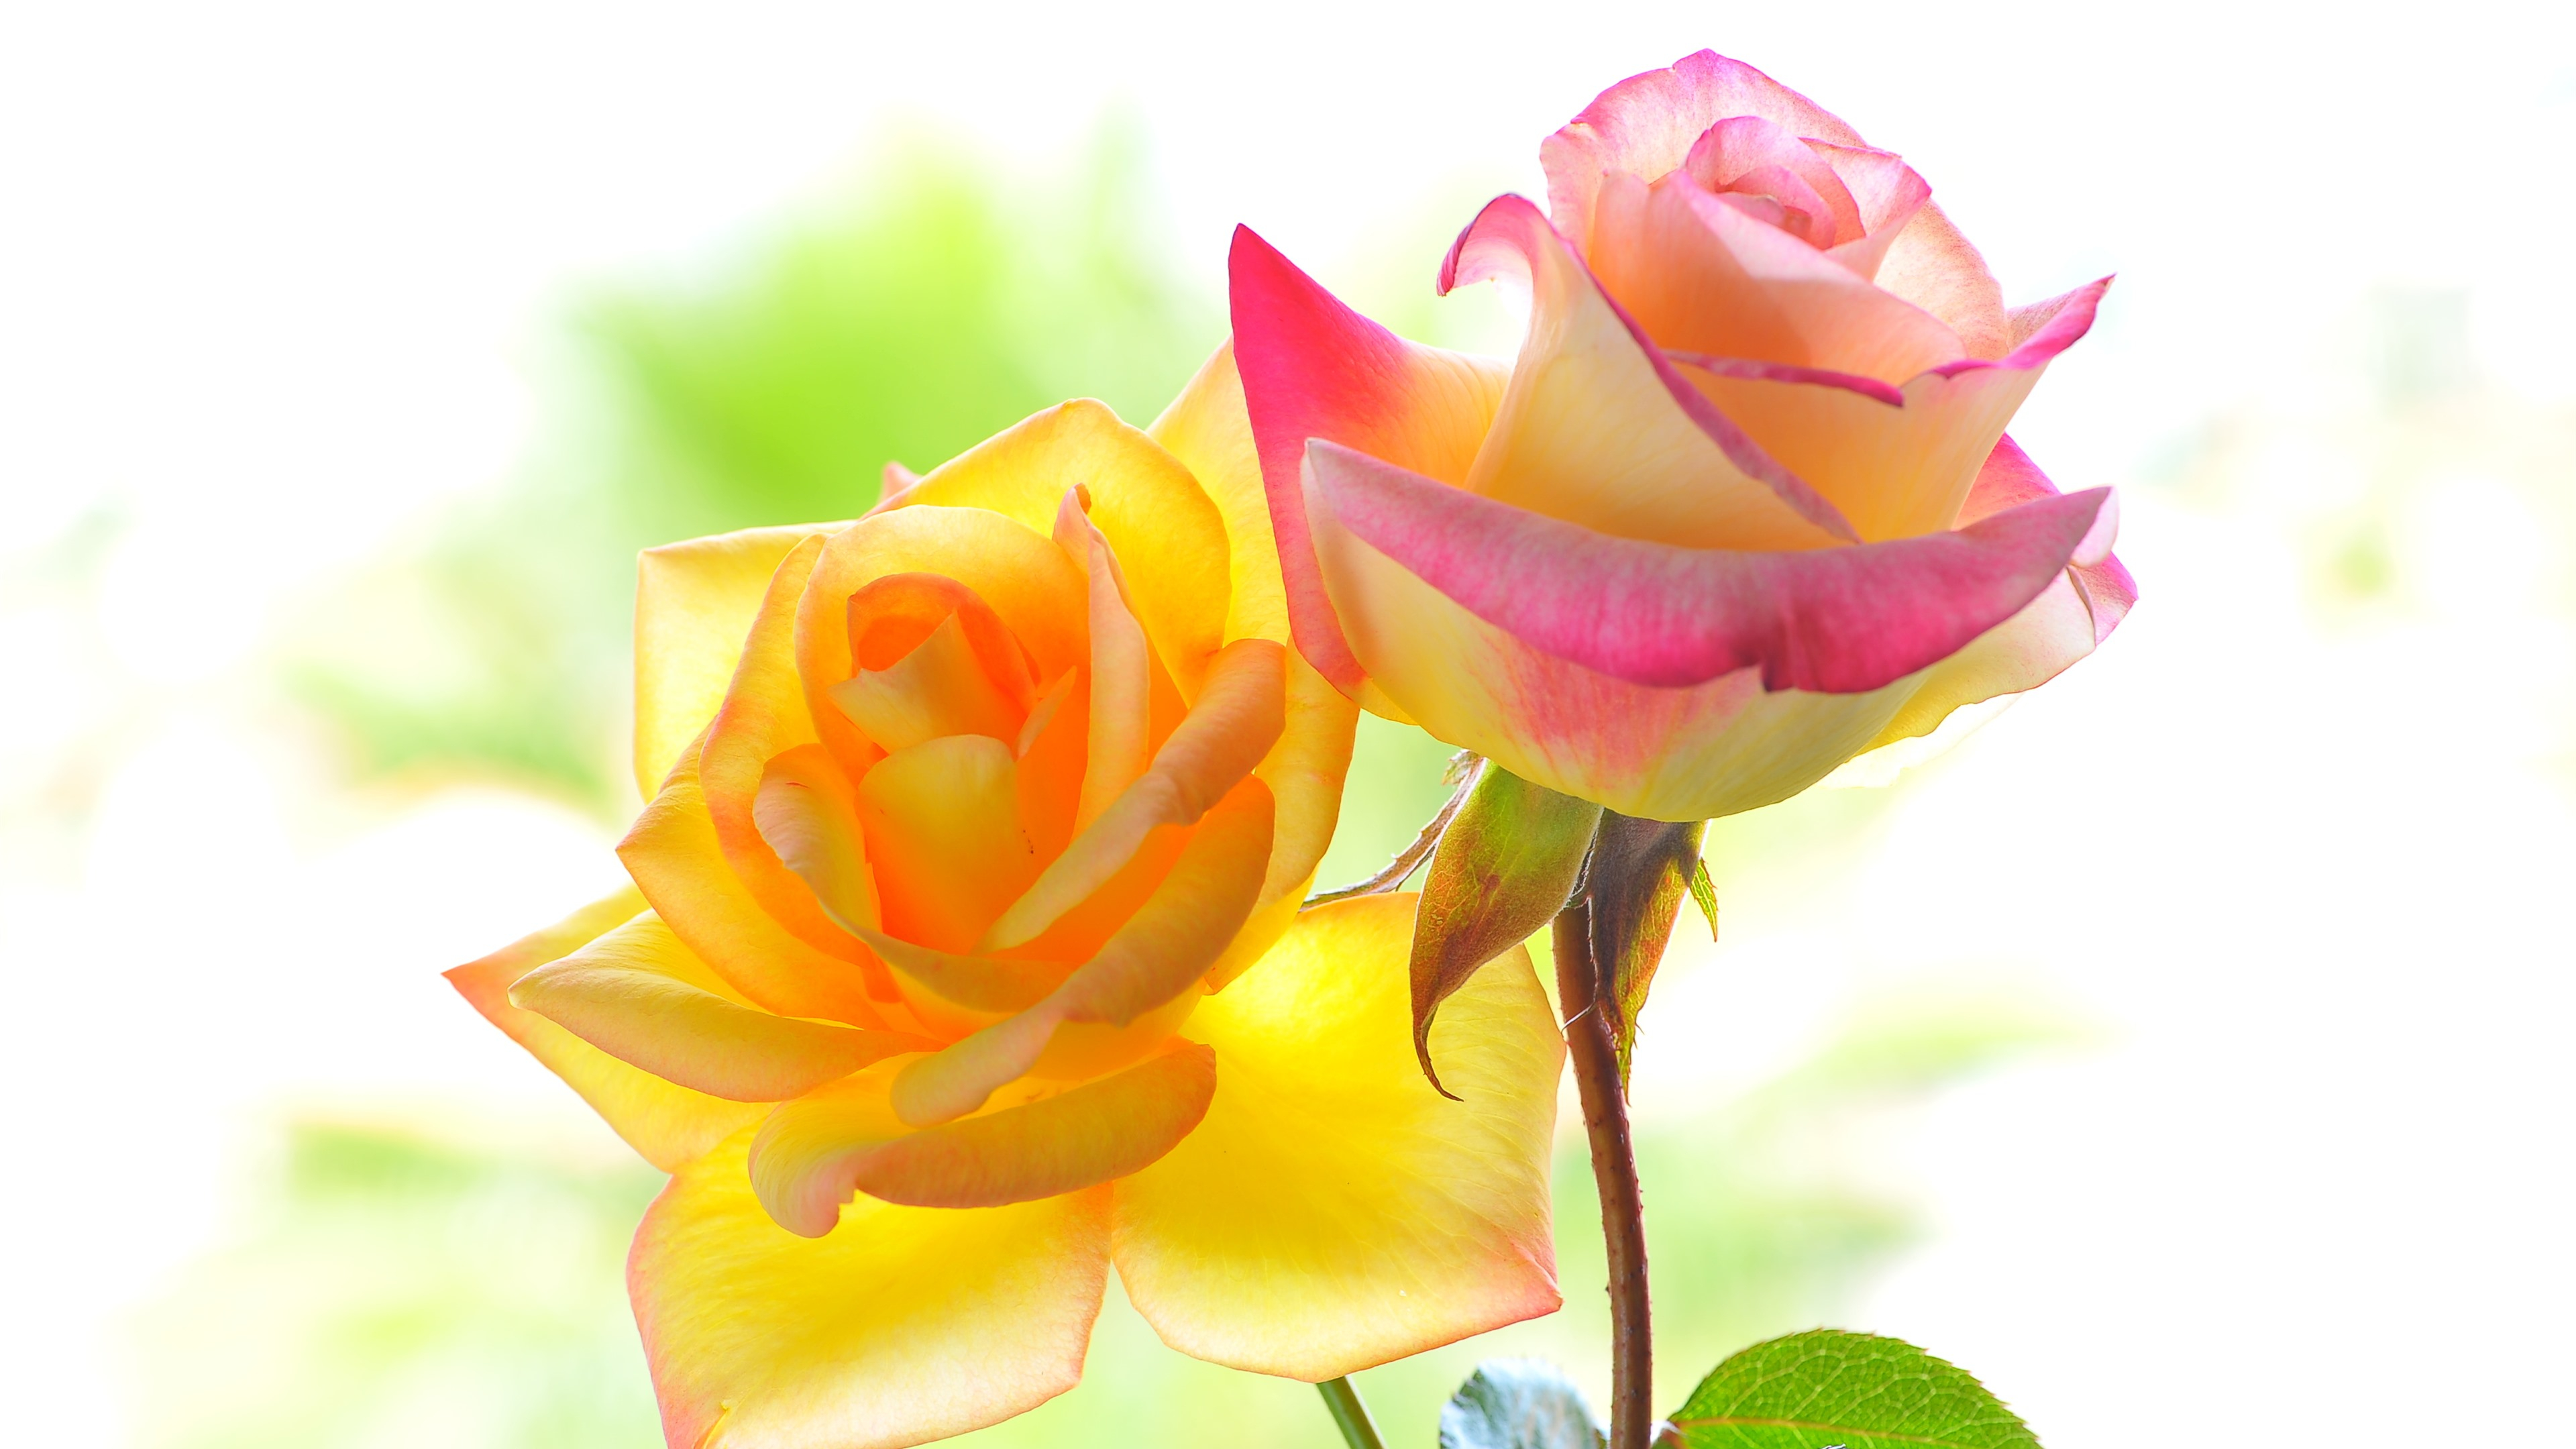 Two flowers of yellow and pink rose